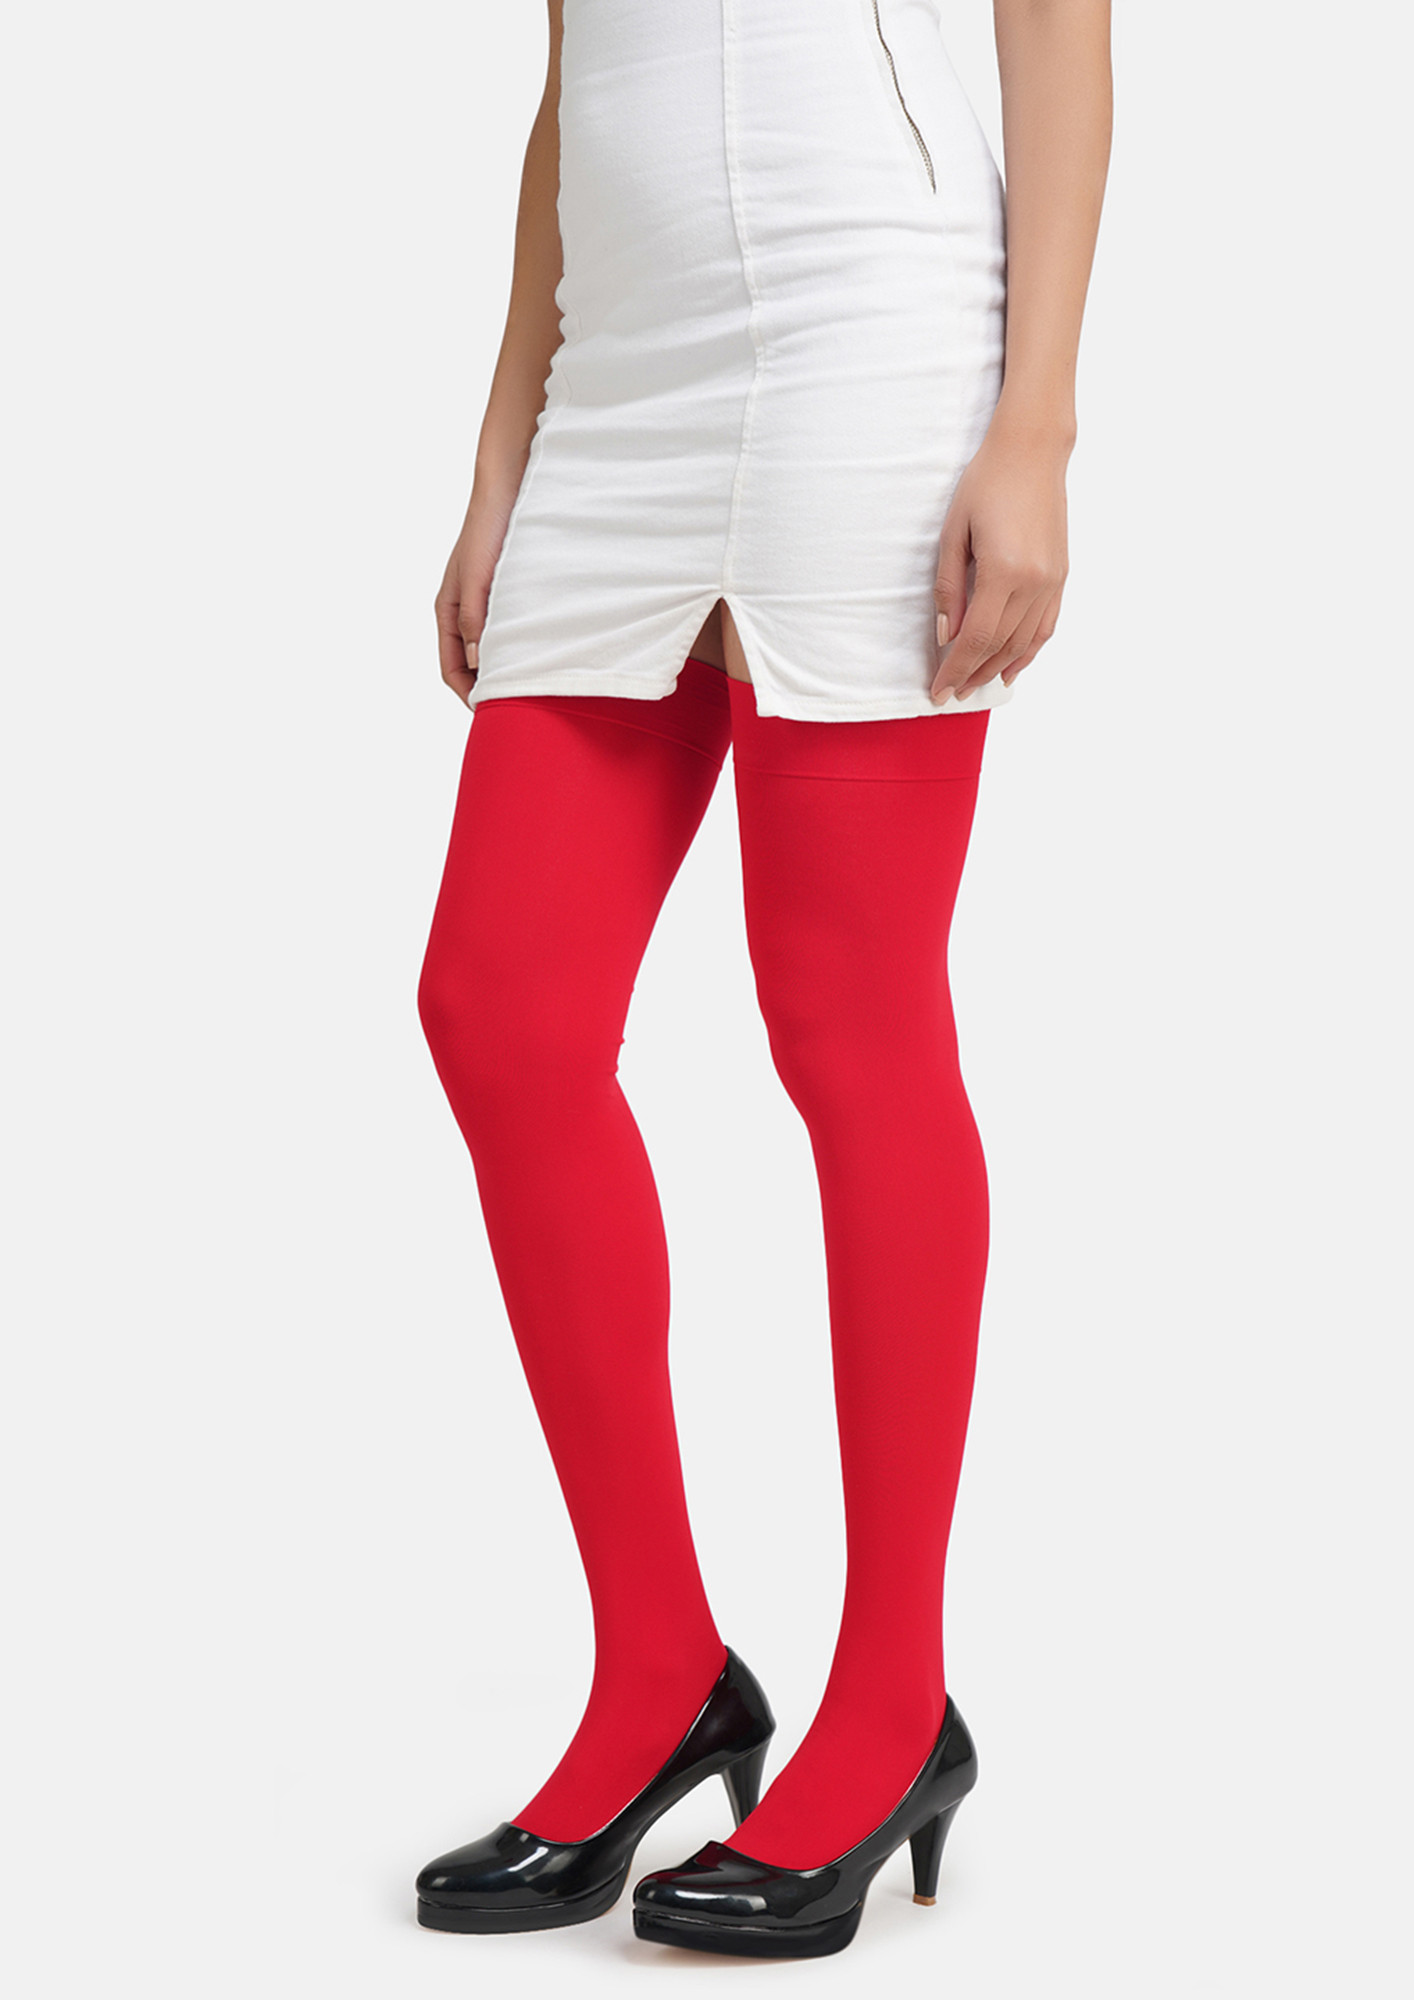 Opaque Stockings - Buy Opaque Stockings online in India